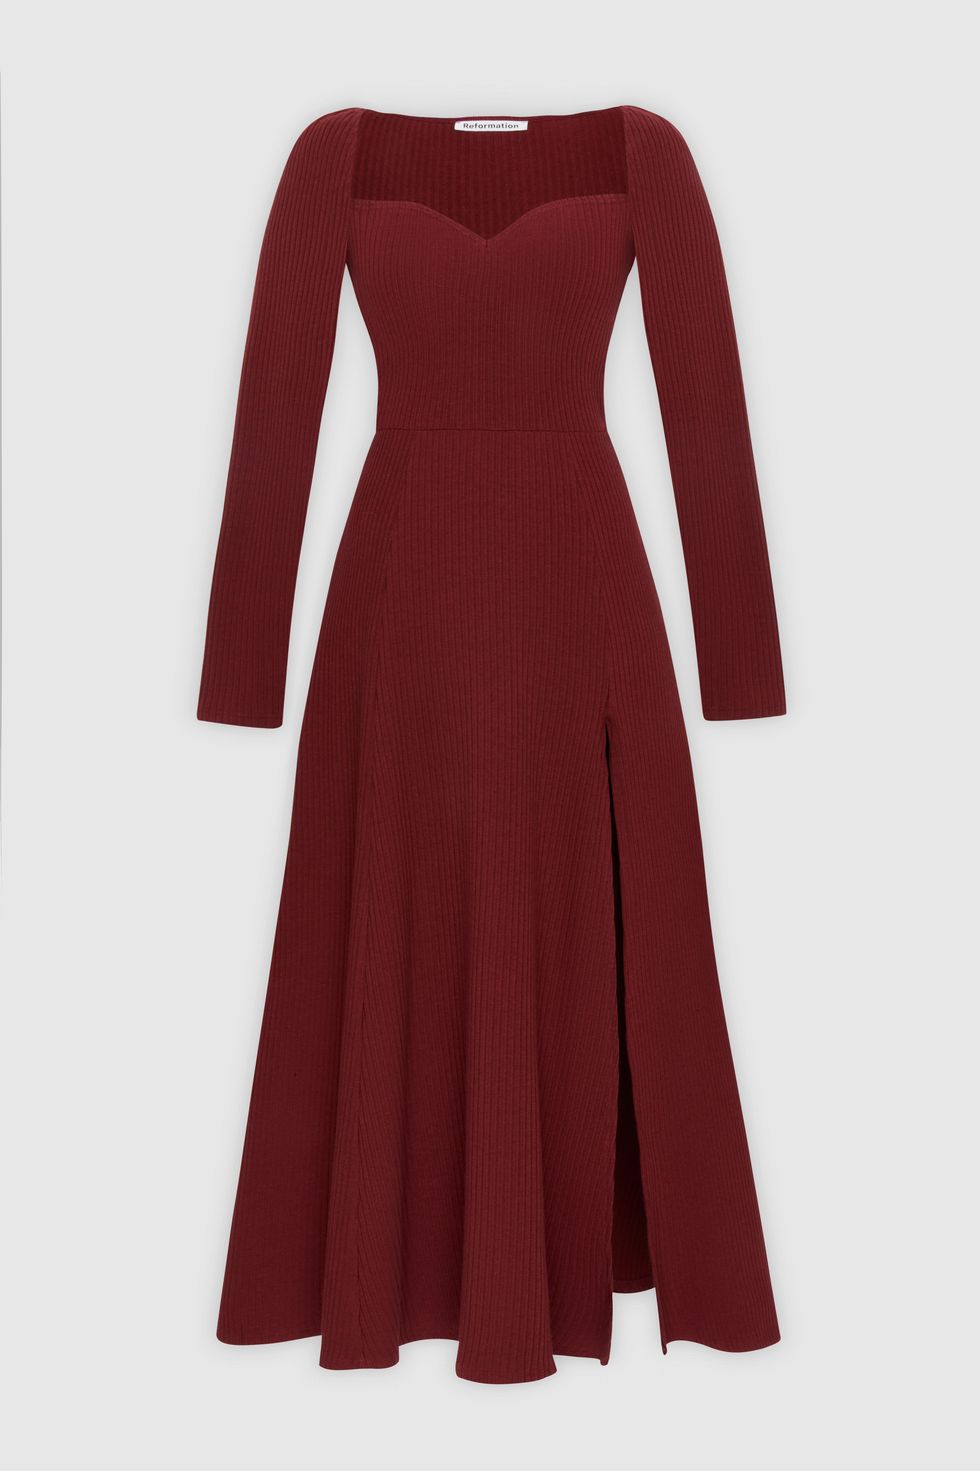 30 Best Autumn Dresses 2022 Has To Offer